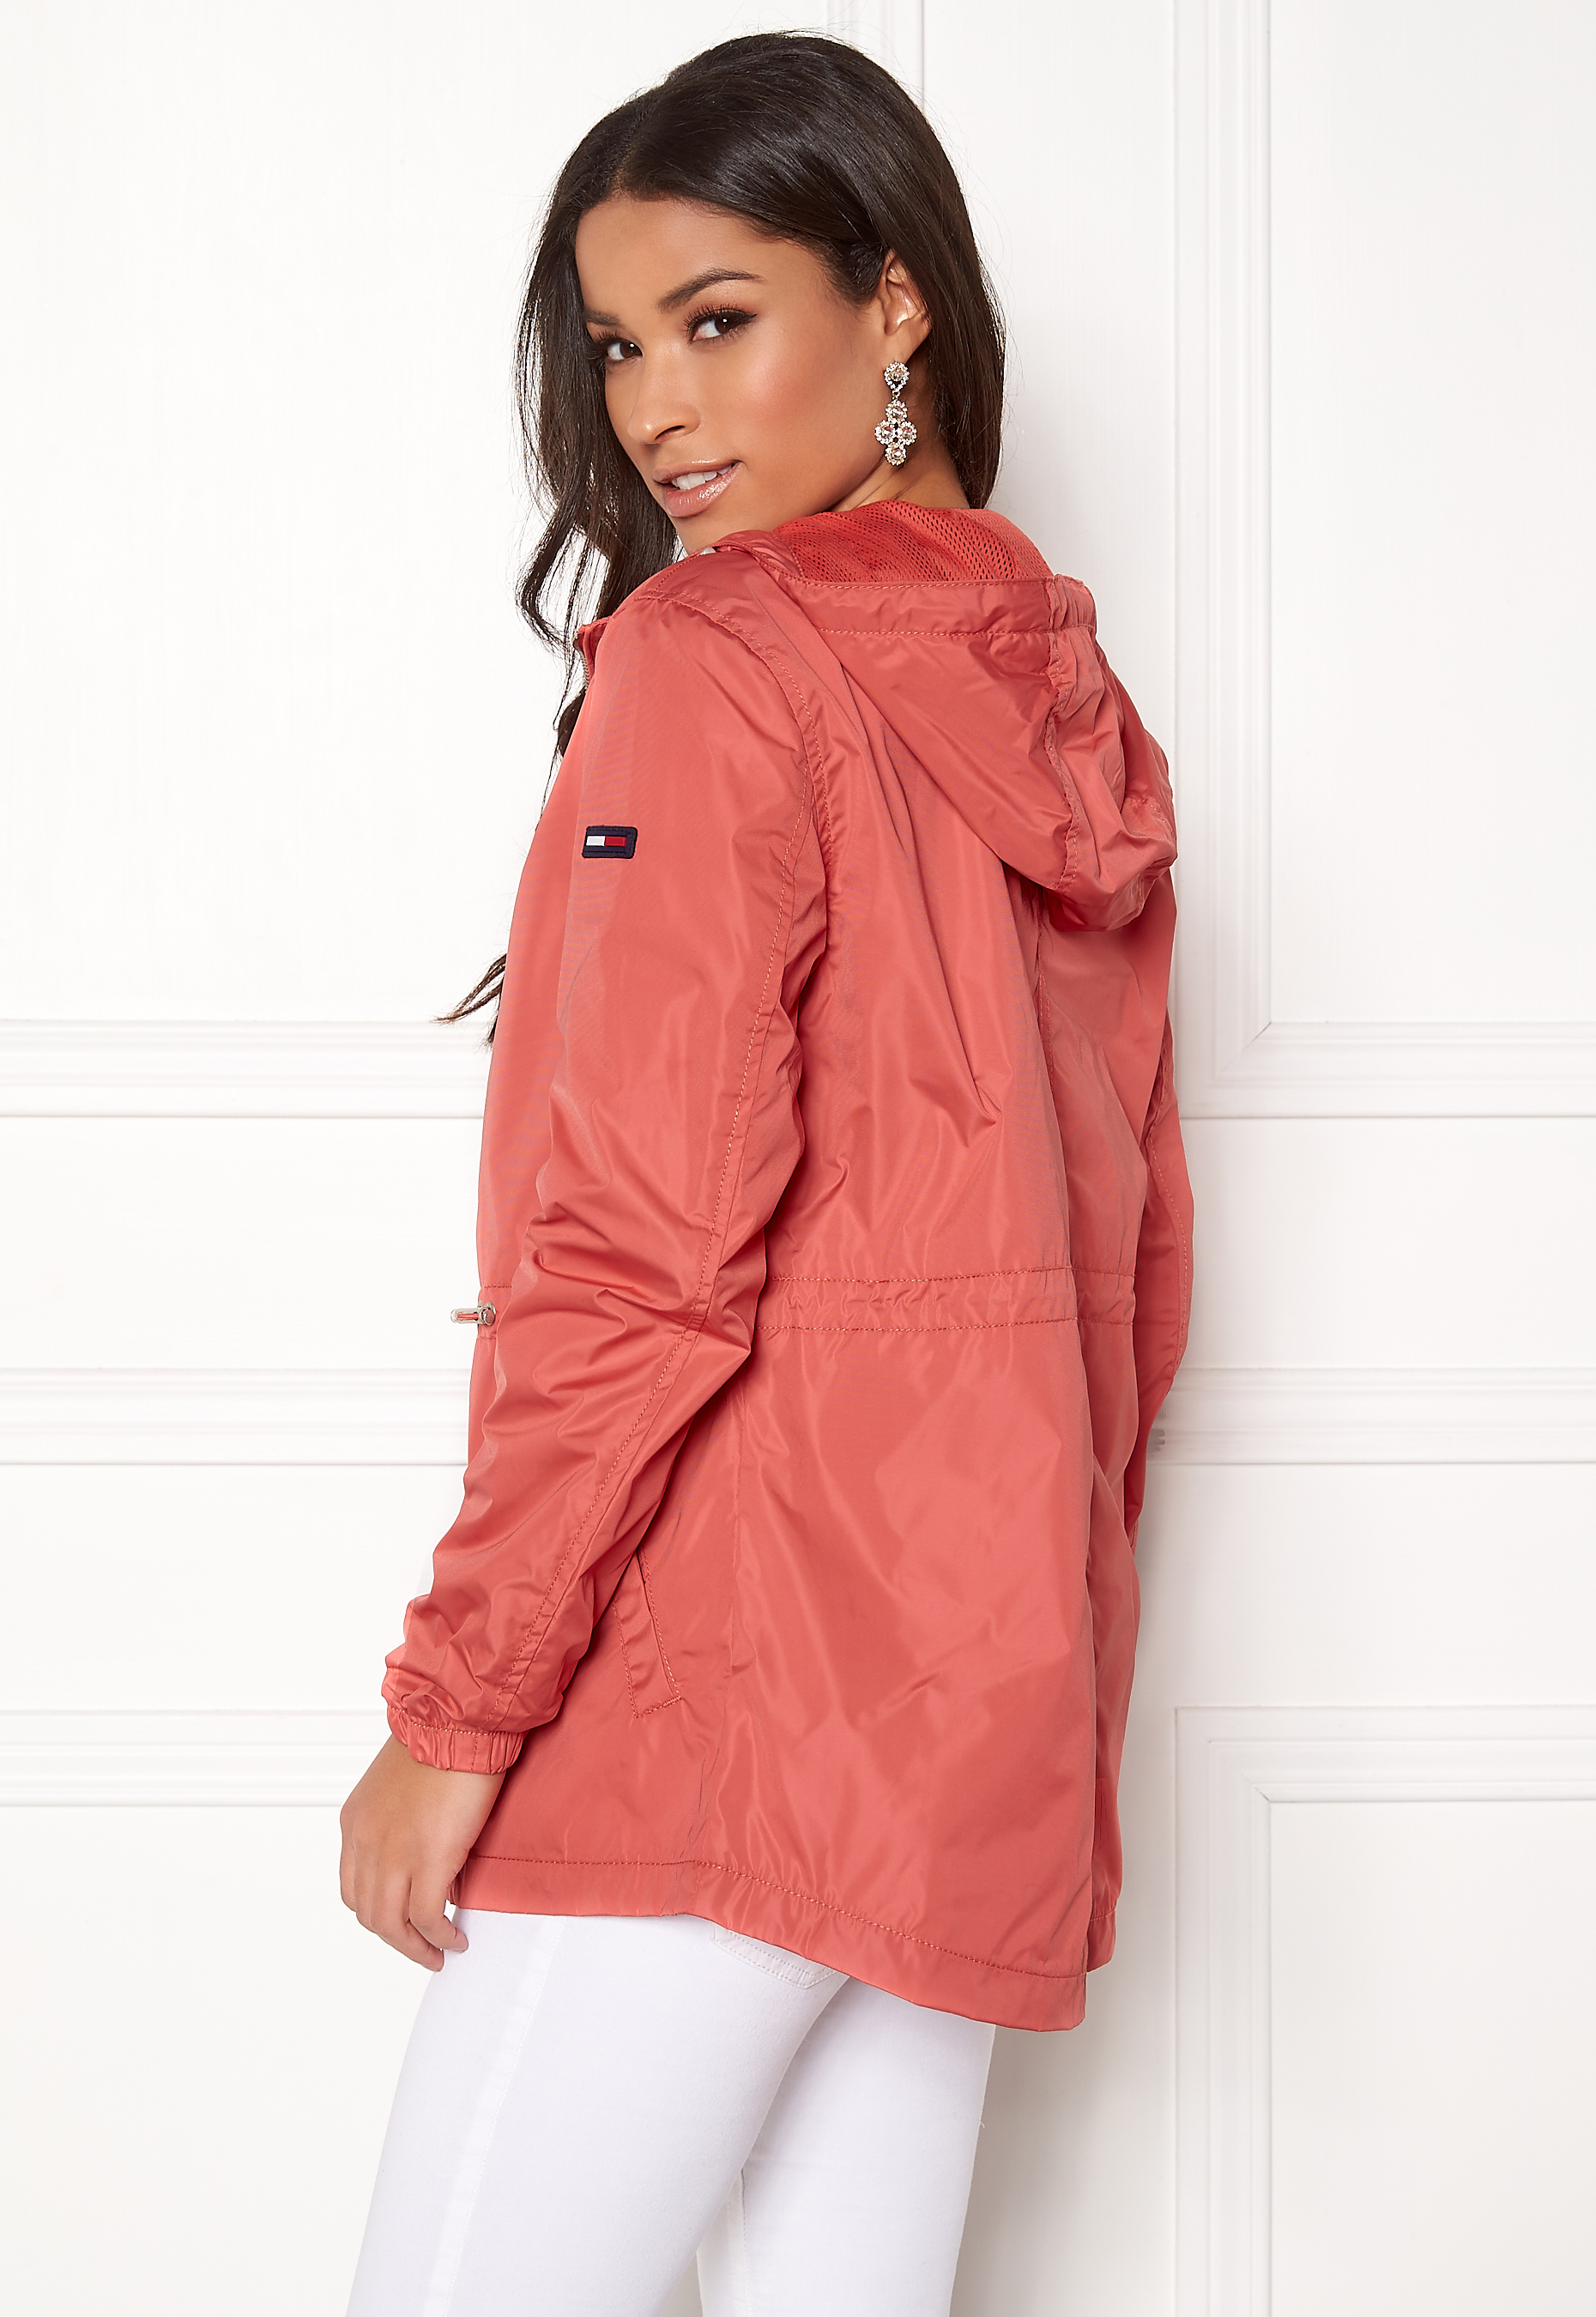 TOMMY JEANS Essential Jacket 689 Spiced Coral - Bubbleroom